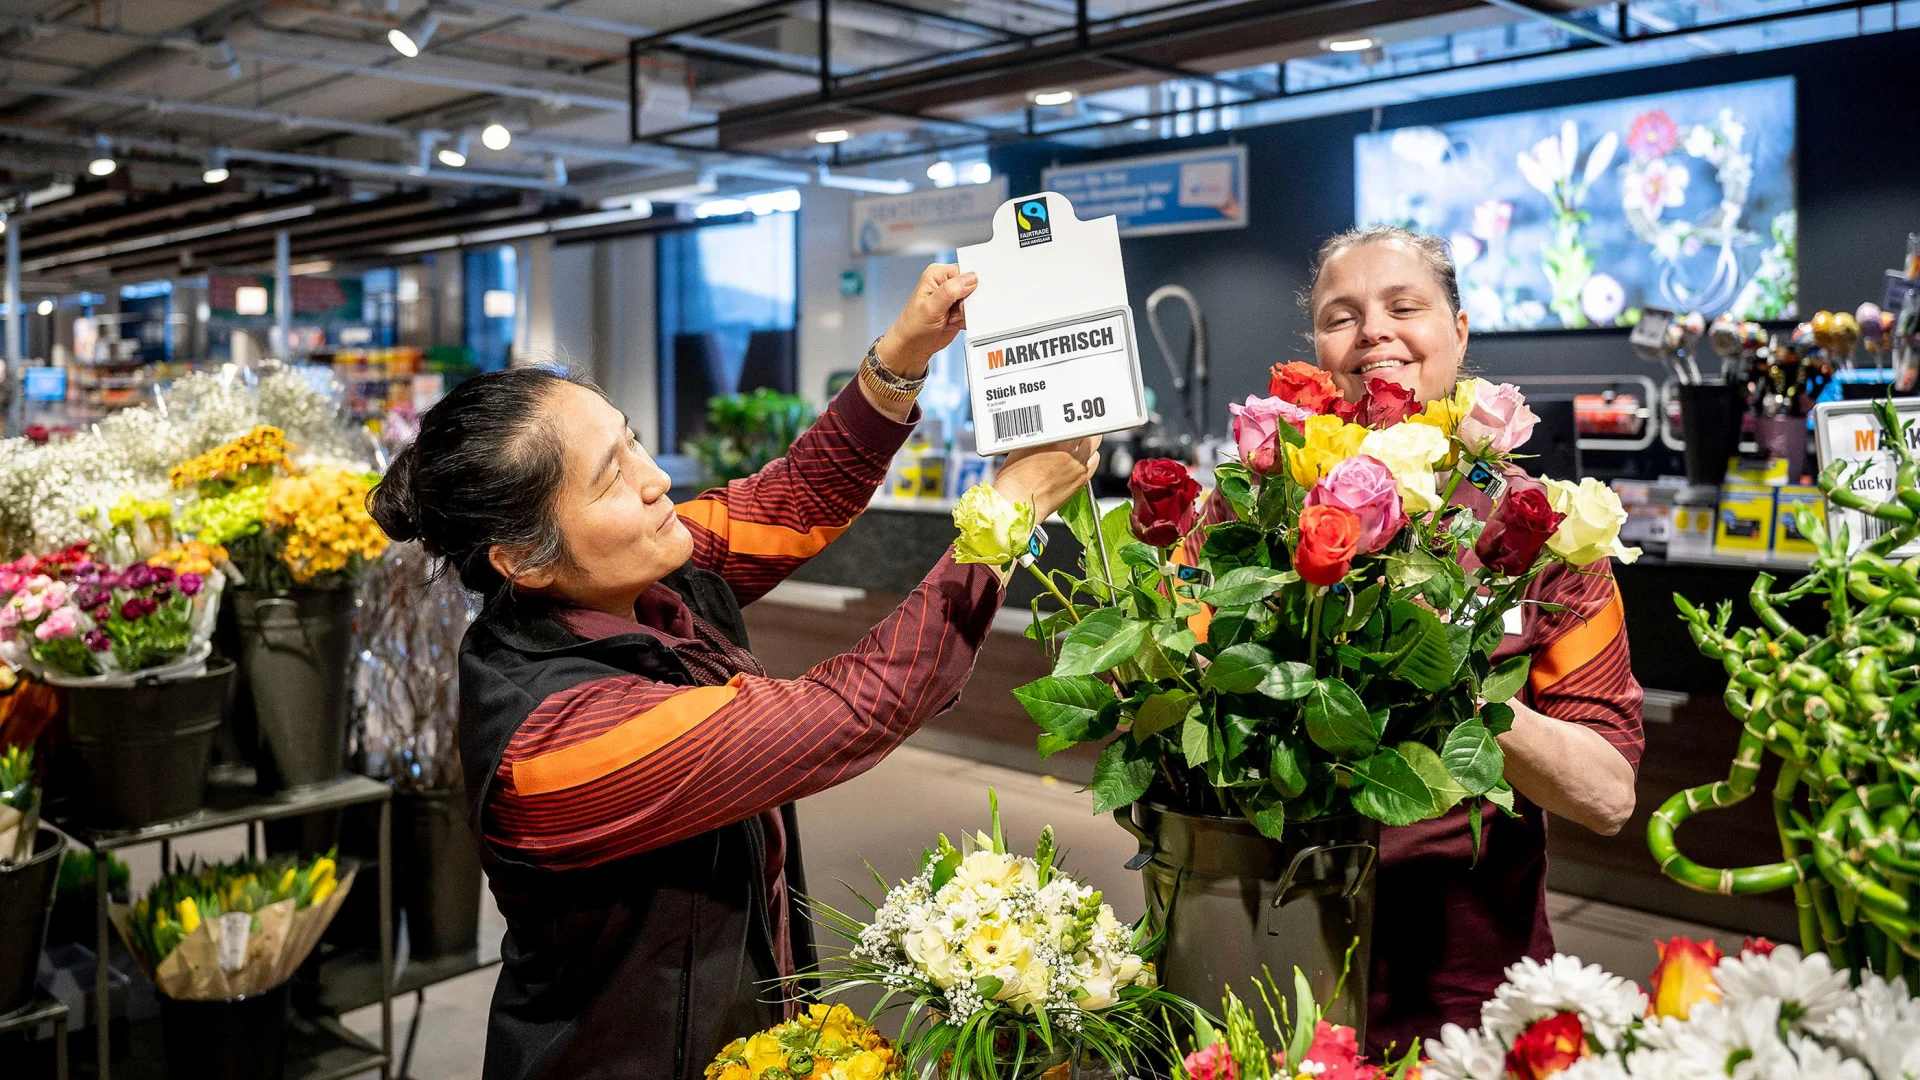 Two employees from the flower department prepare roses to sell